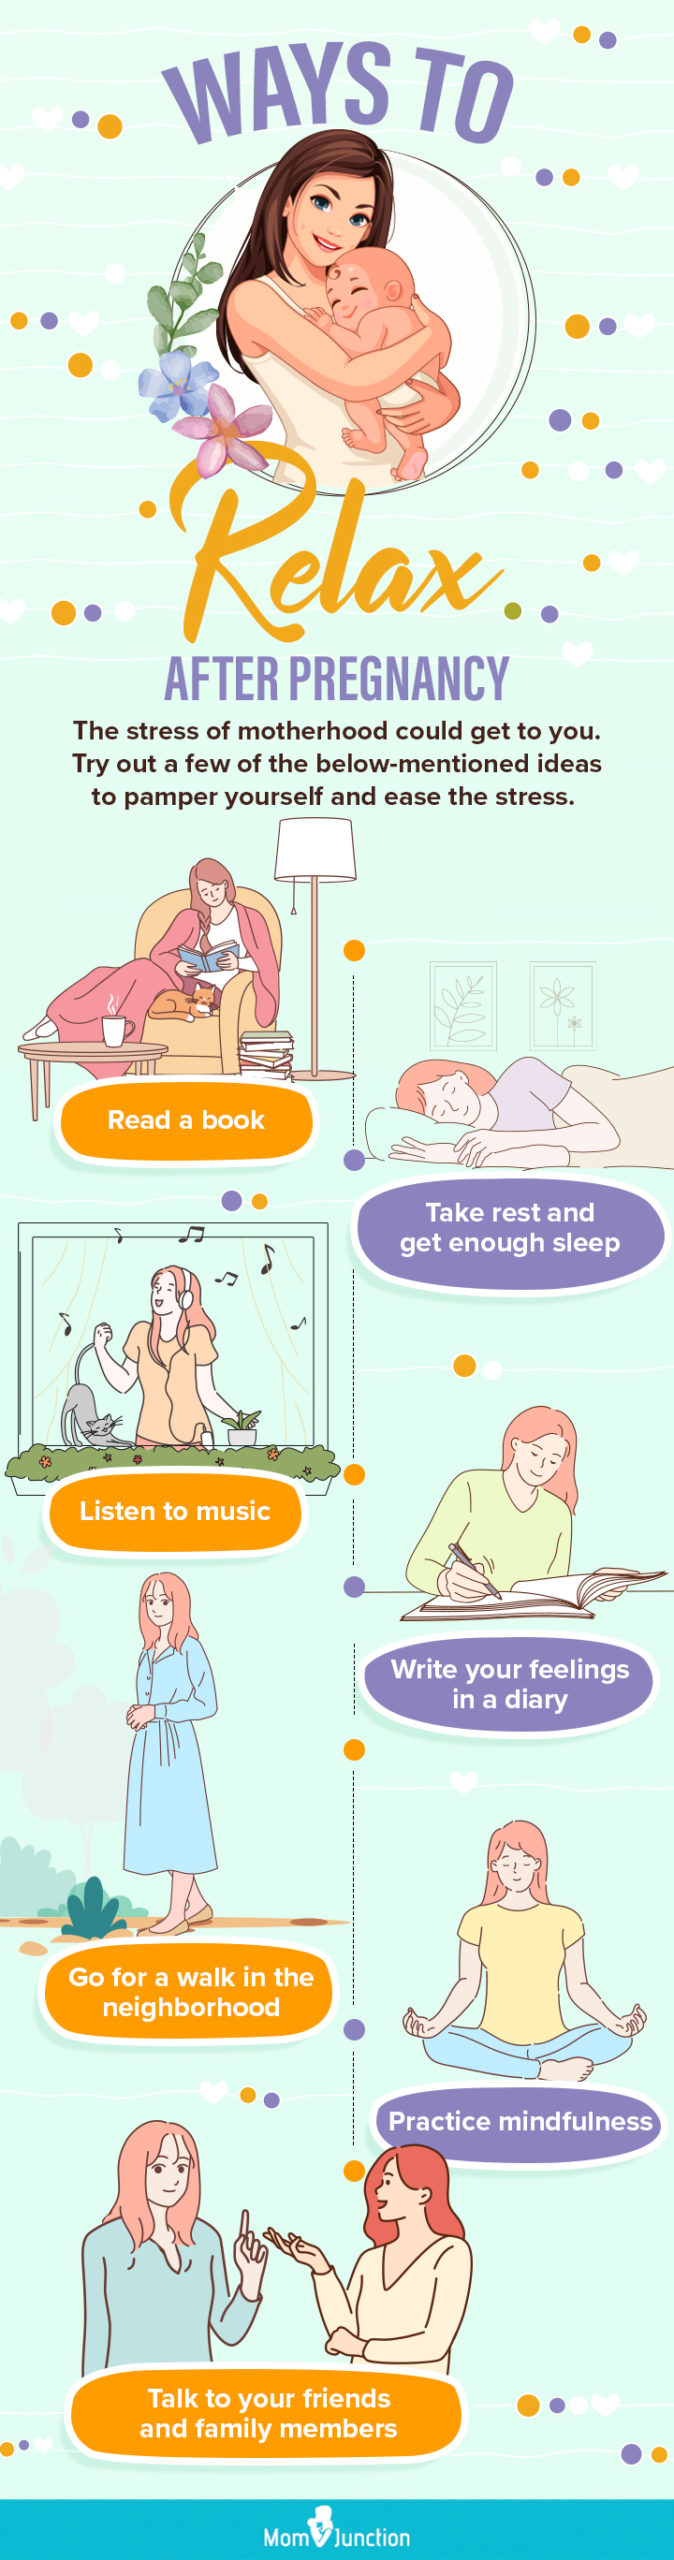 ways to relax after pregnancy (infographic)